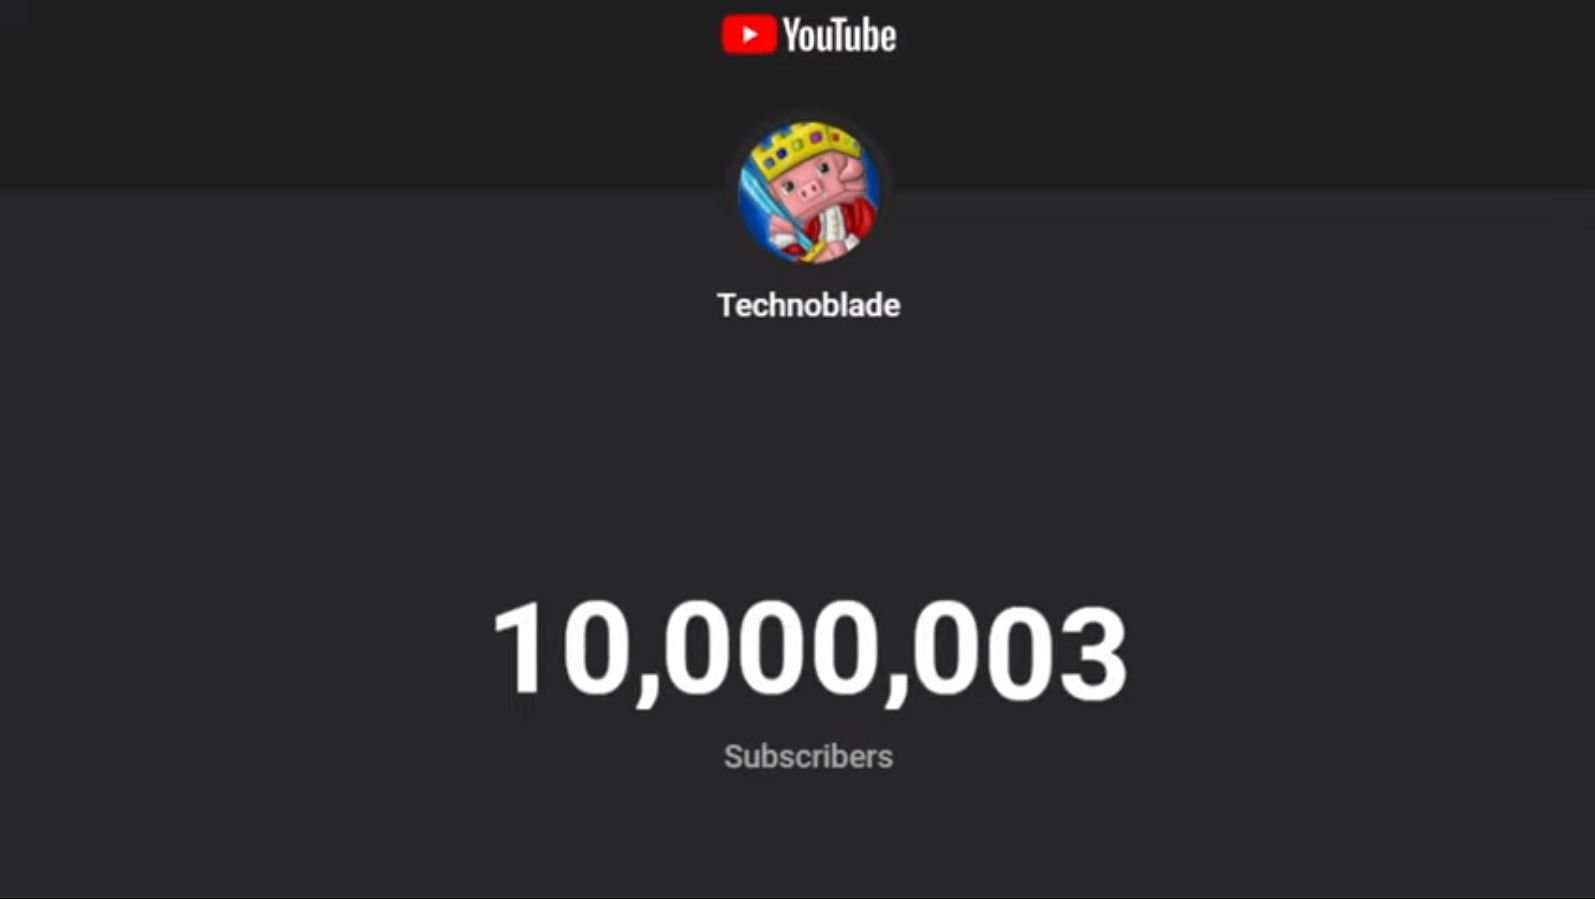 Technoblade manages to reach the milestone of 10 million subscribers before 2022 (Image via Technoblade, YouTube)